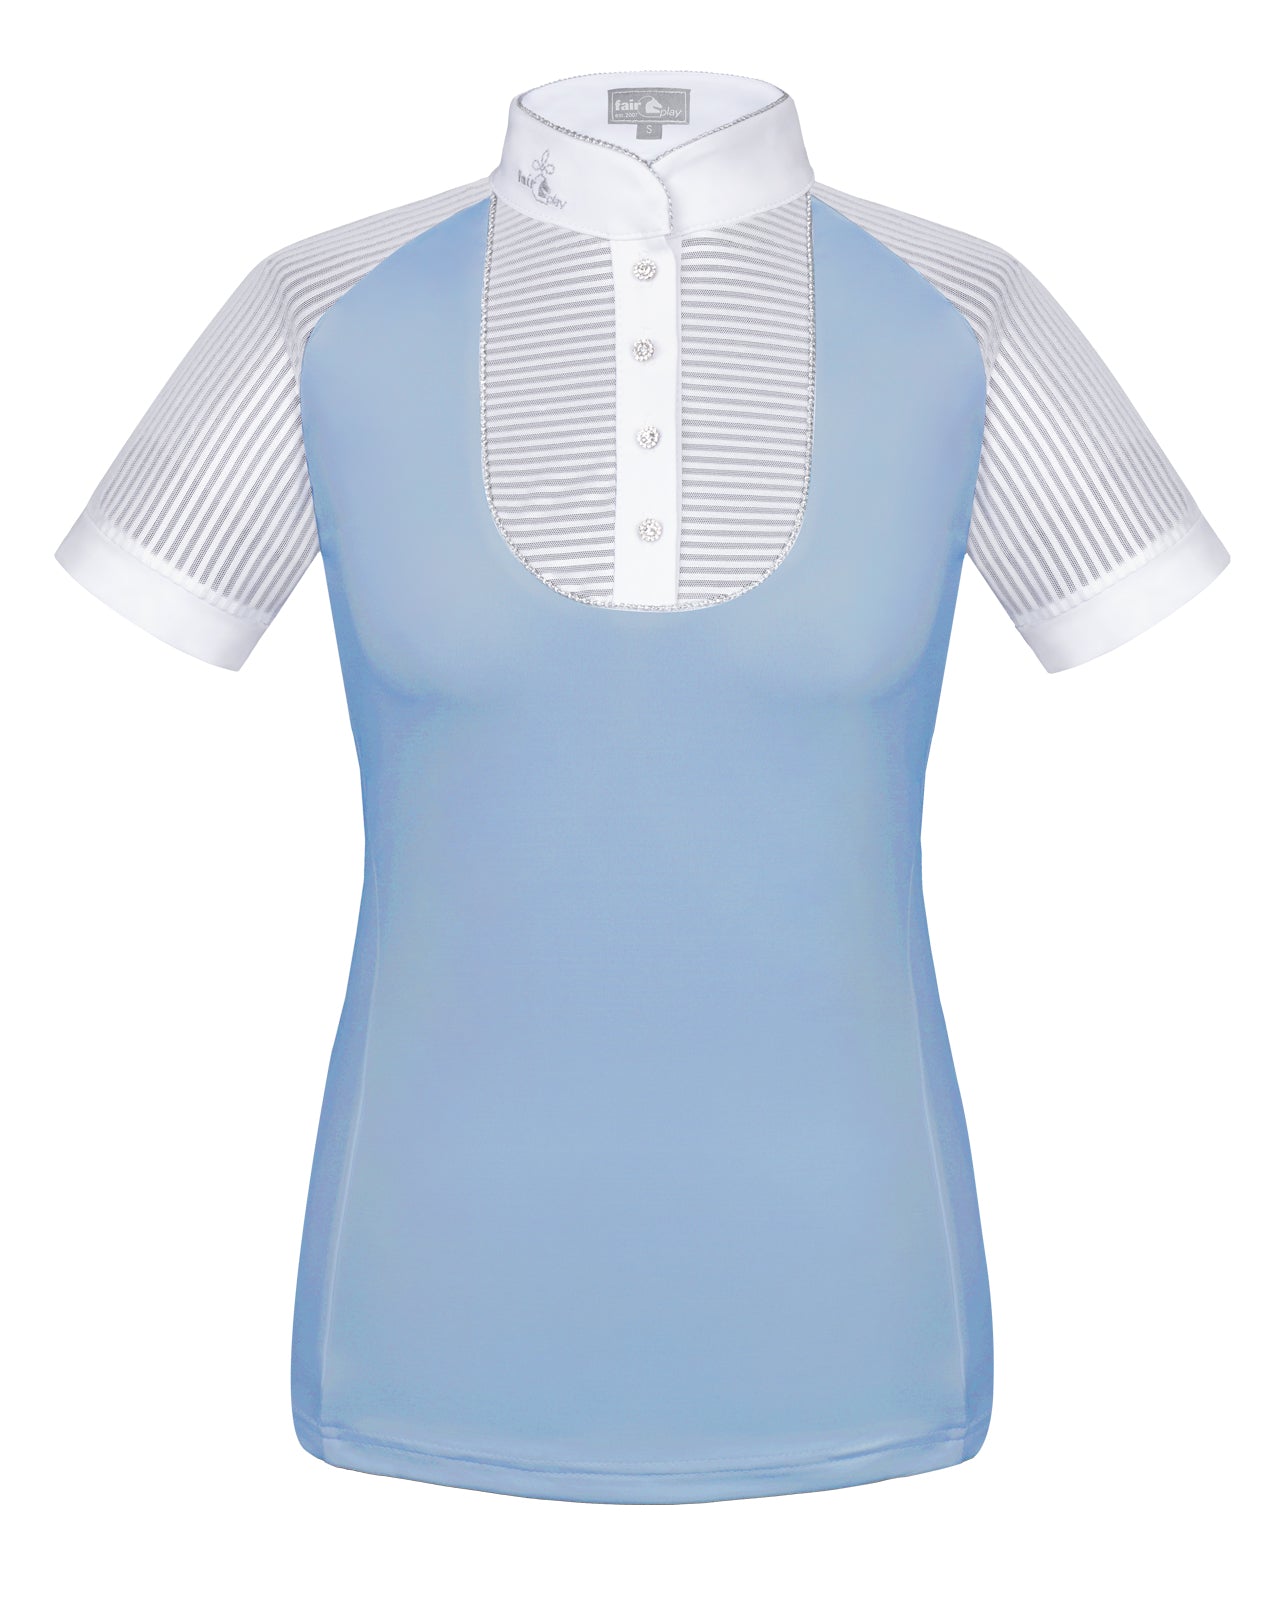 Light blue competition shirt for women with buttons